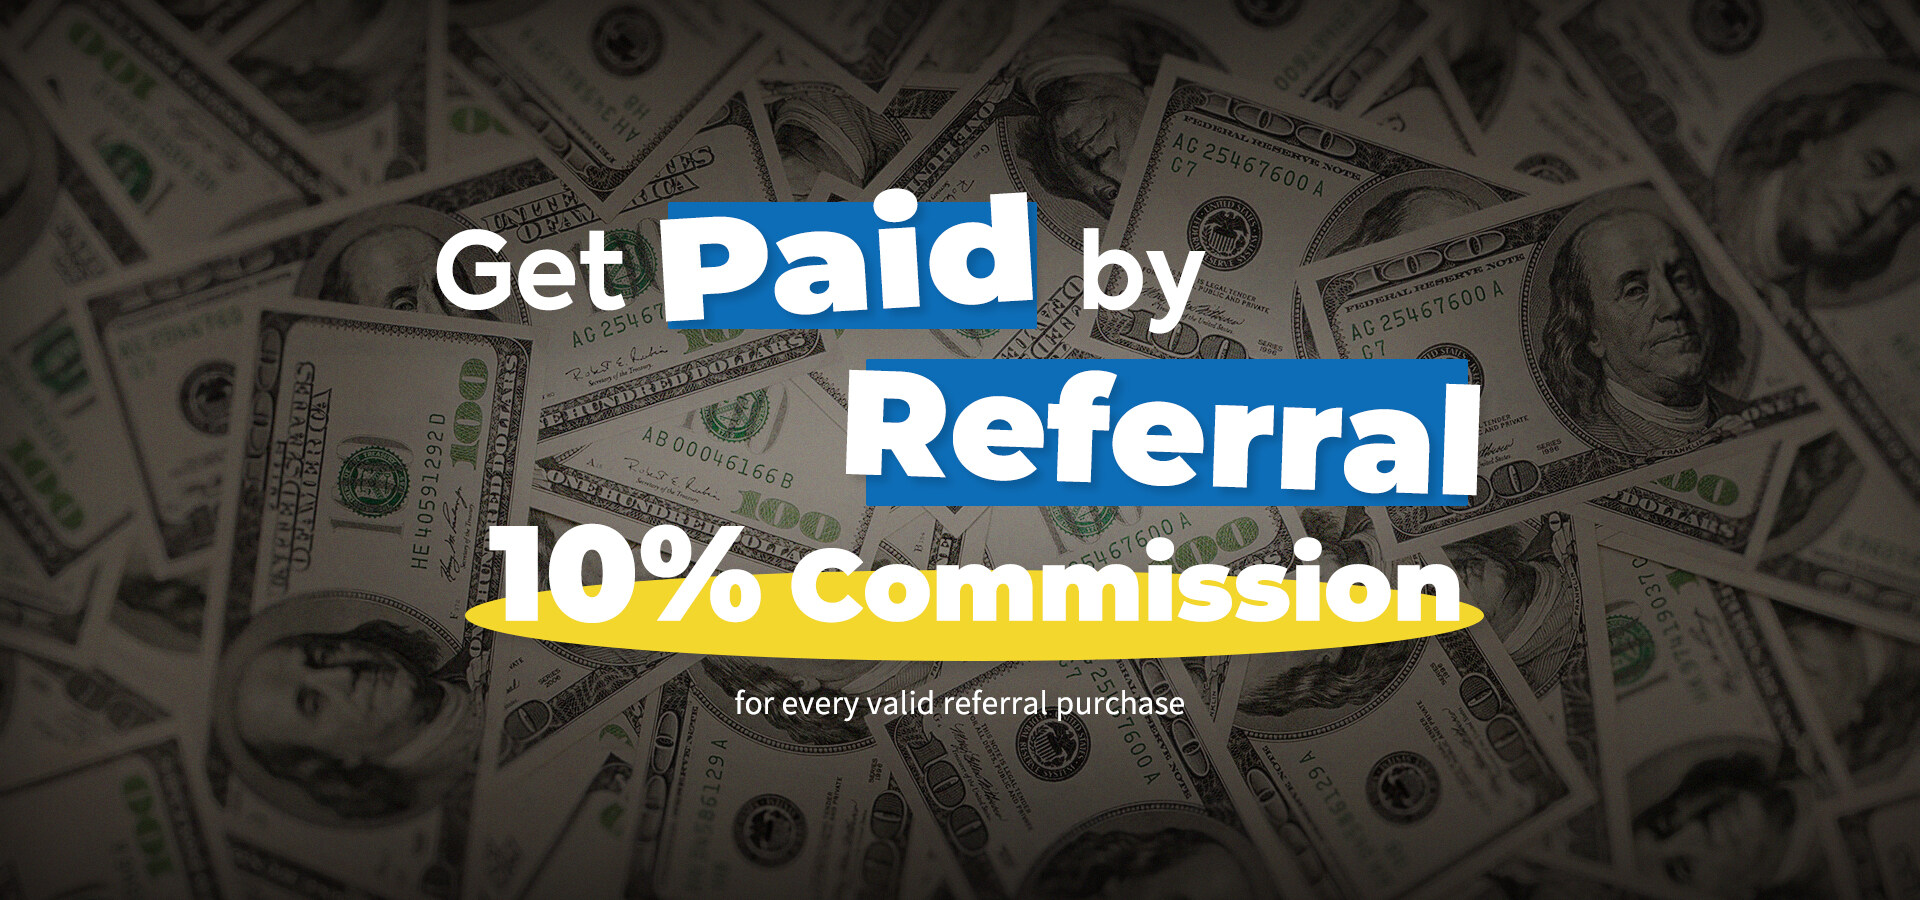 refer a friend and get 10% commisson